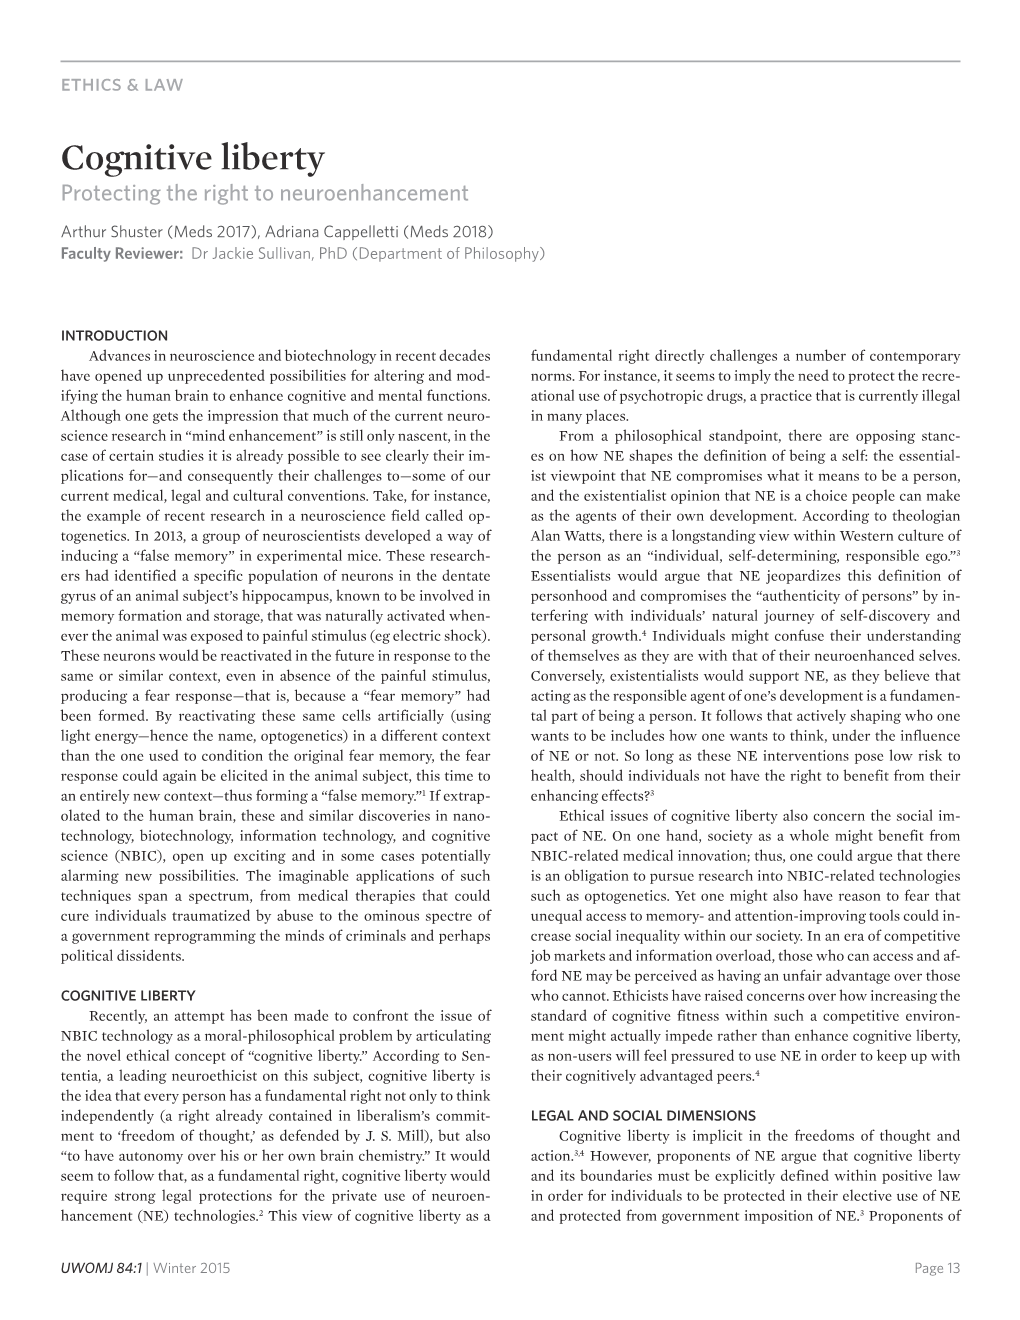 Cognitive Liberty Protecting the Right to Neuroenhancement